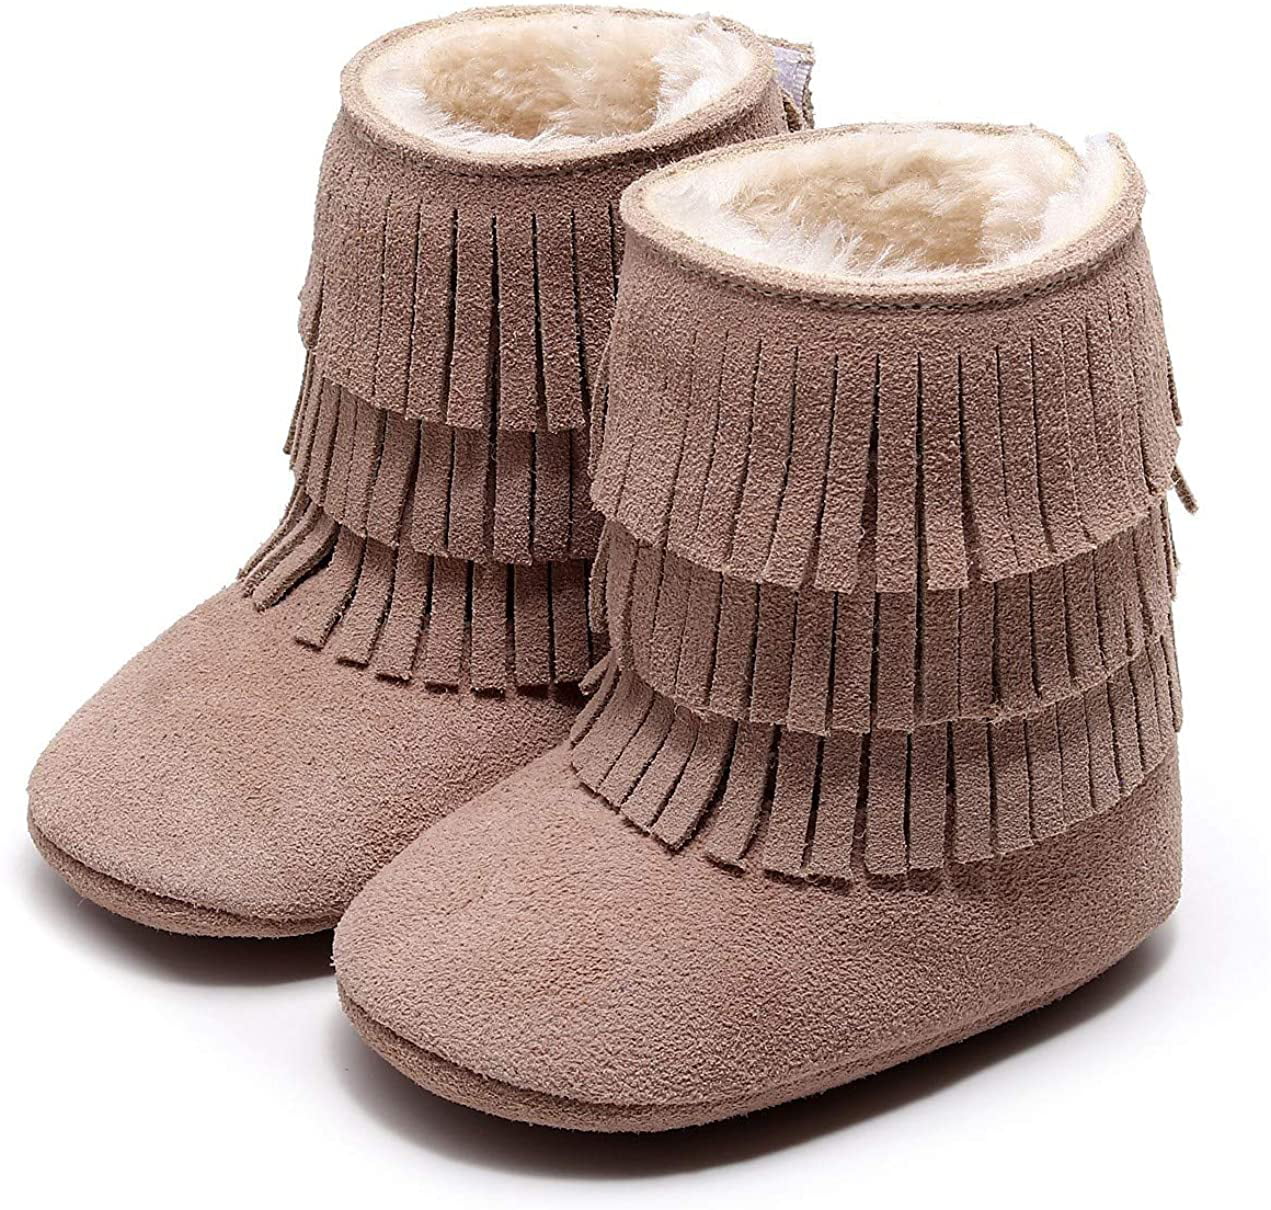 HONGTEYA Real Leather Fringe Baby Booties for Girls Boys Winter Warm Snow Boots with Tassels Soft Sole Fur LinedToddler Moccasins Shoes